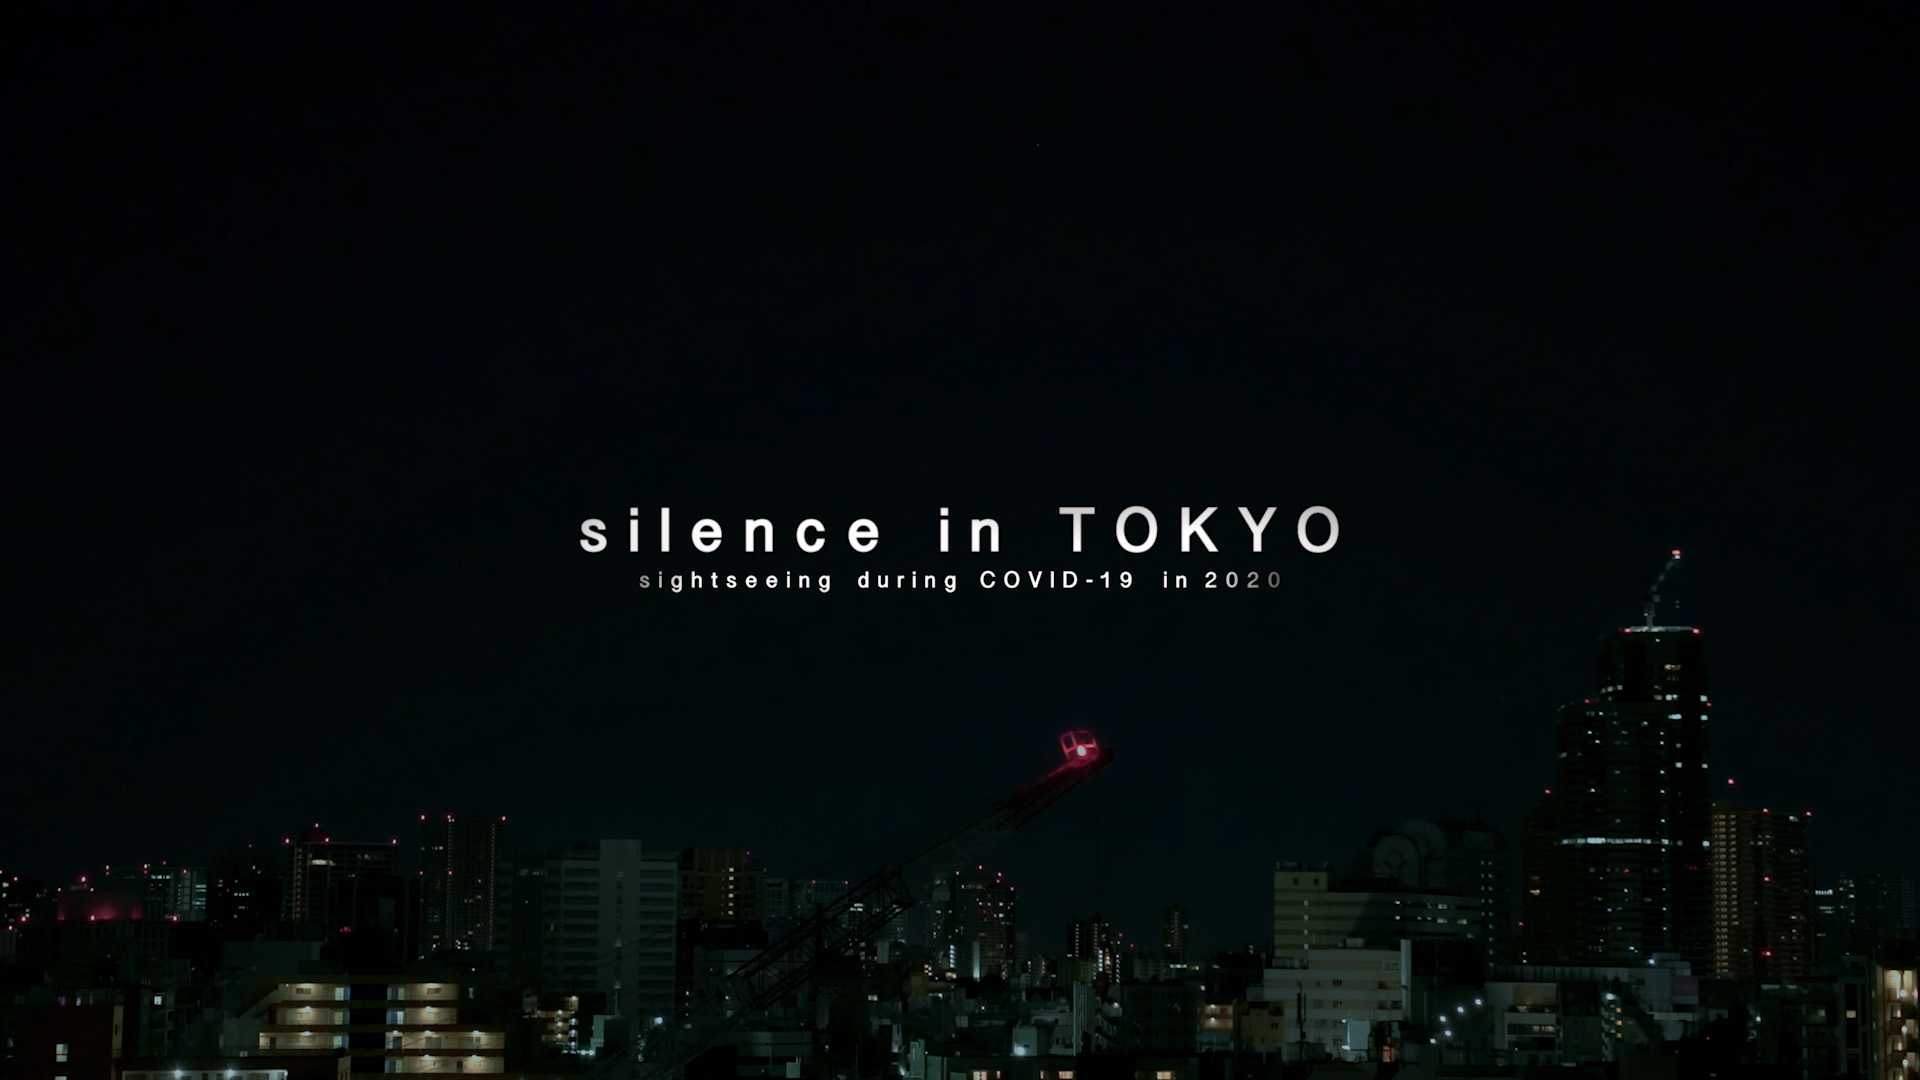 fusilence in TOKYO sightseeing during COVID-19 in 2020vDVD11.30s\Tt̔